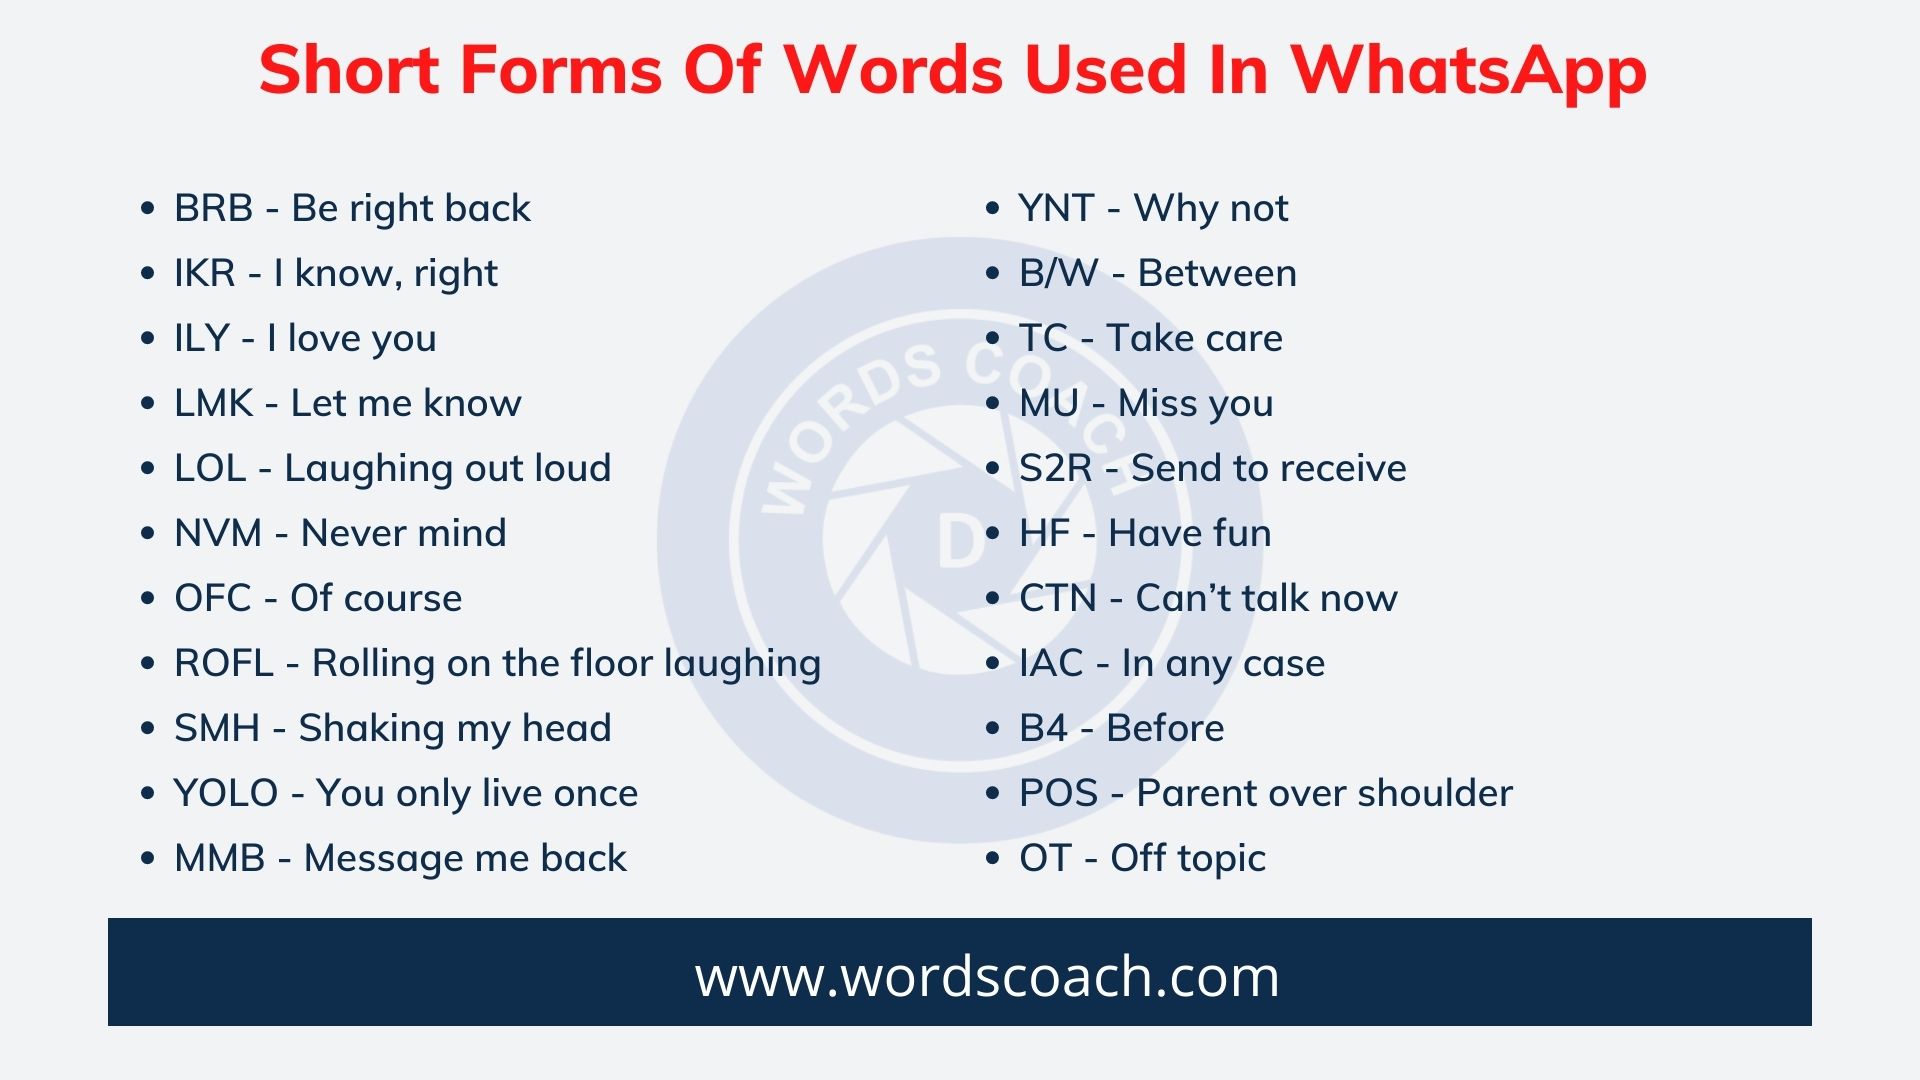 Short Forms Of Words Used In WhatsApp